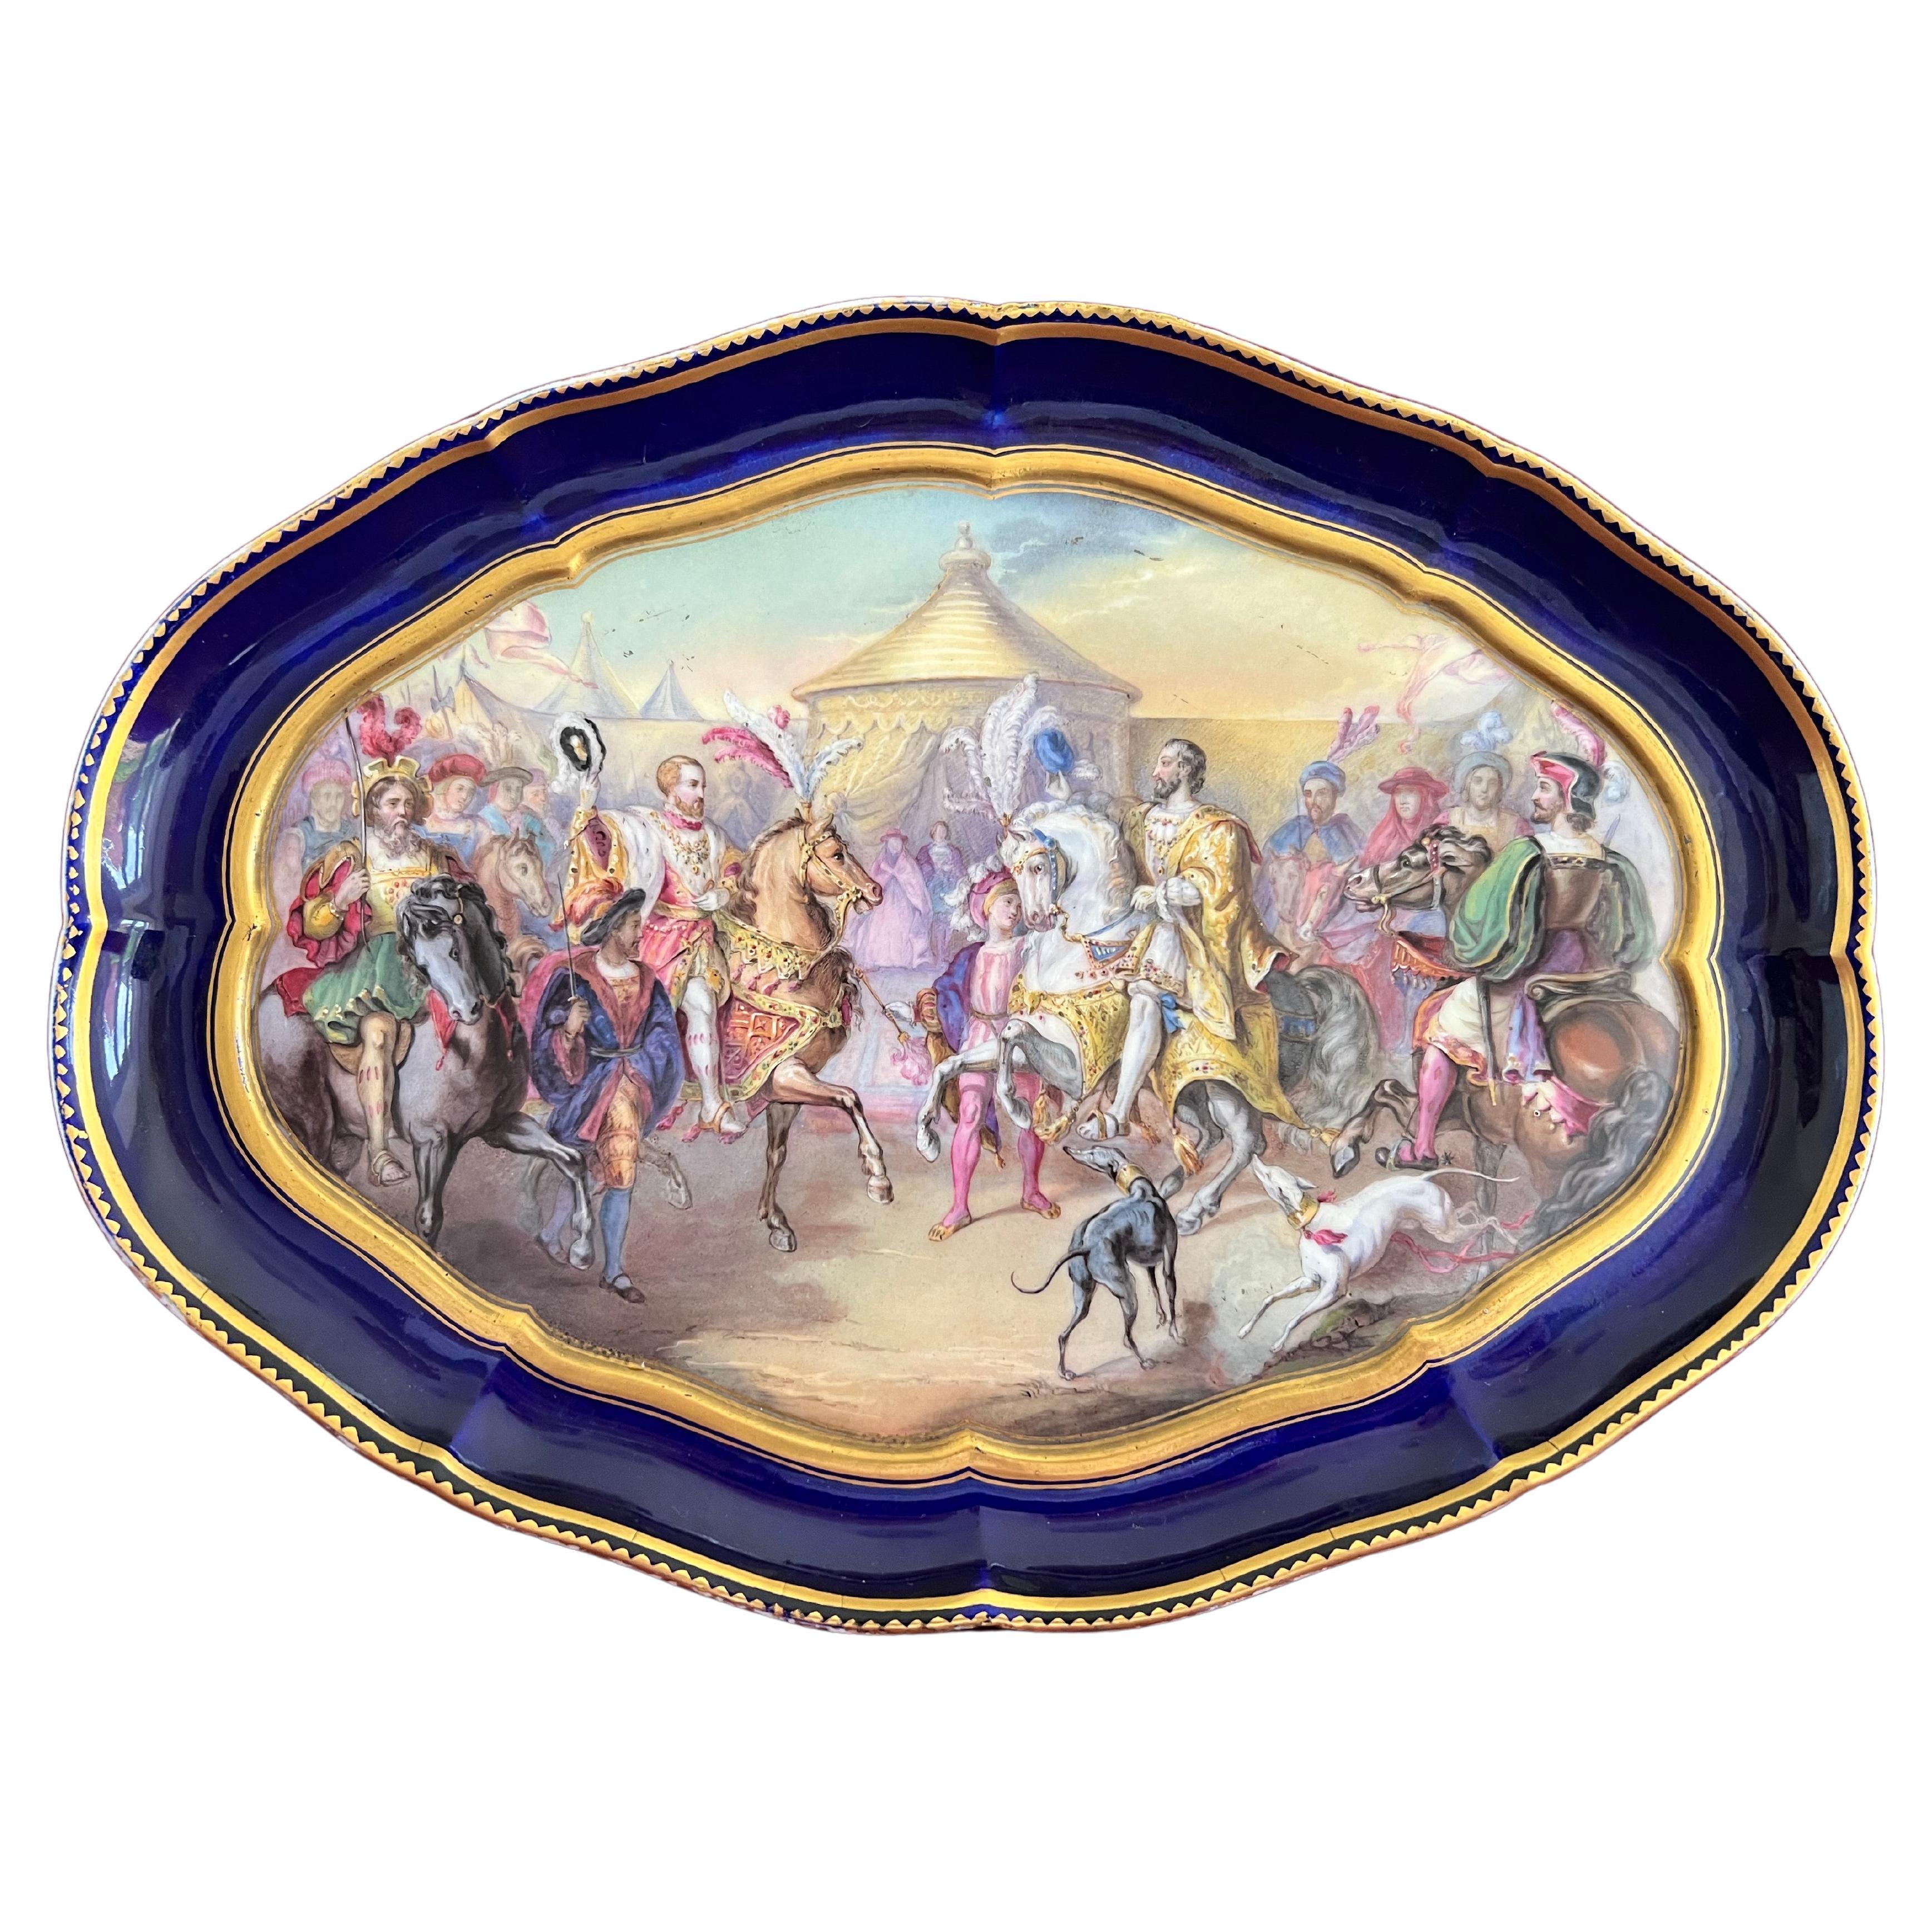 Very Finely Decorated Sevres Porcelain Tray